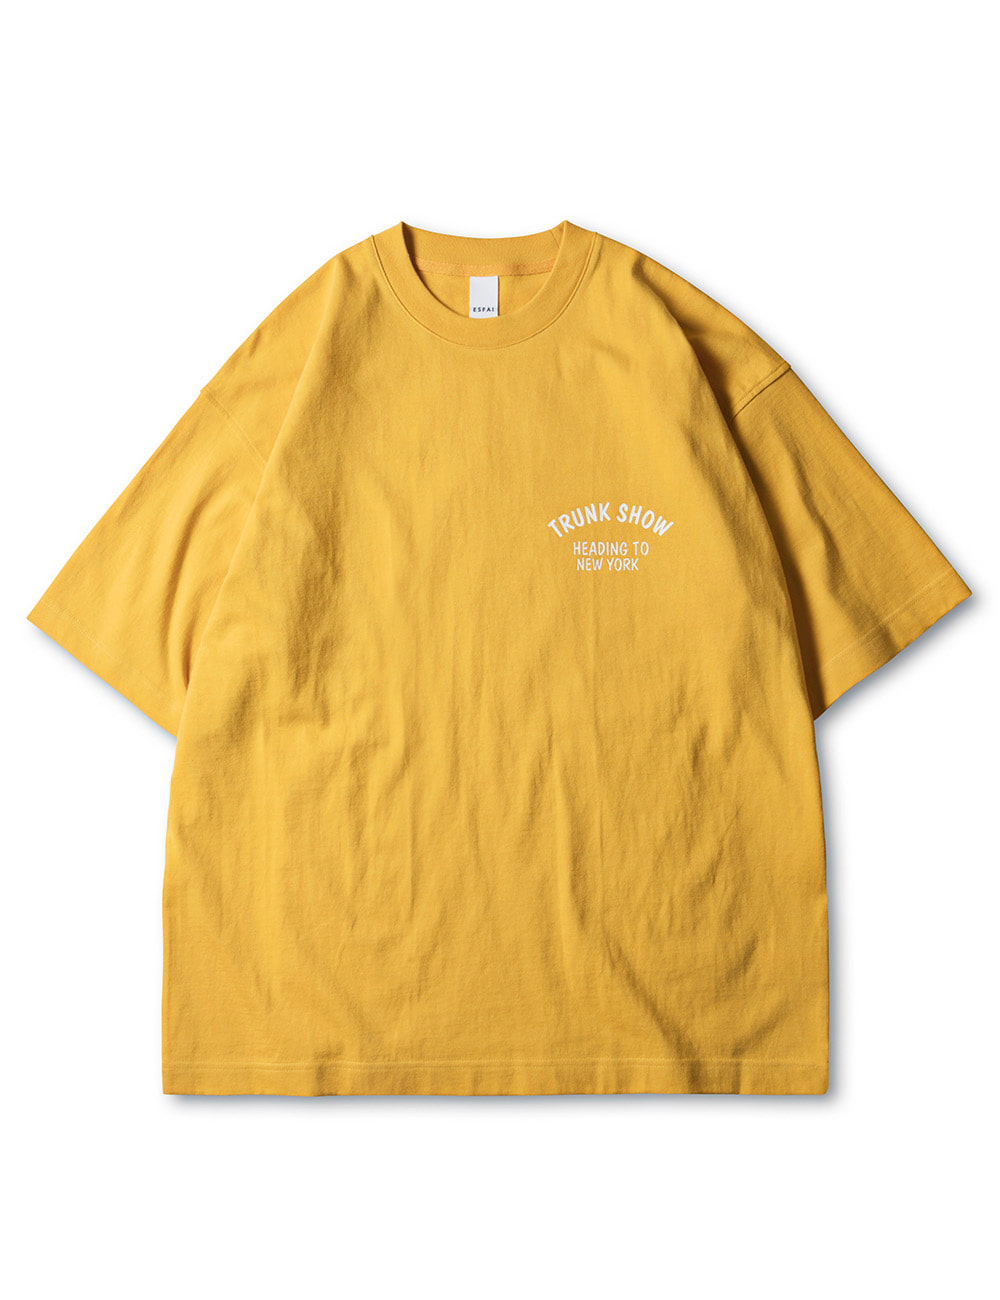 [TRUNK SHOW] HEADING TO NEW YORK T SHIRTS (MUSTARD)